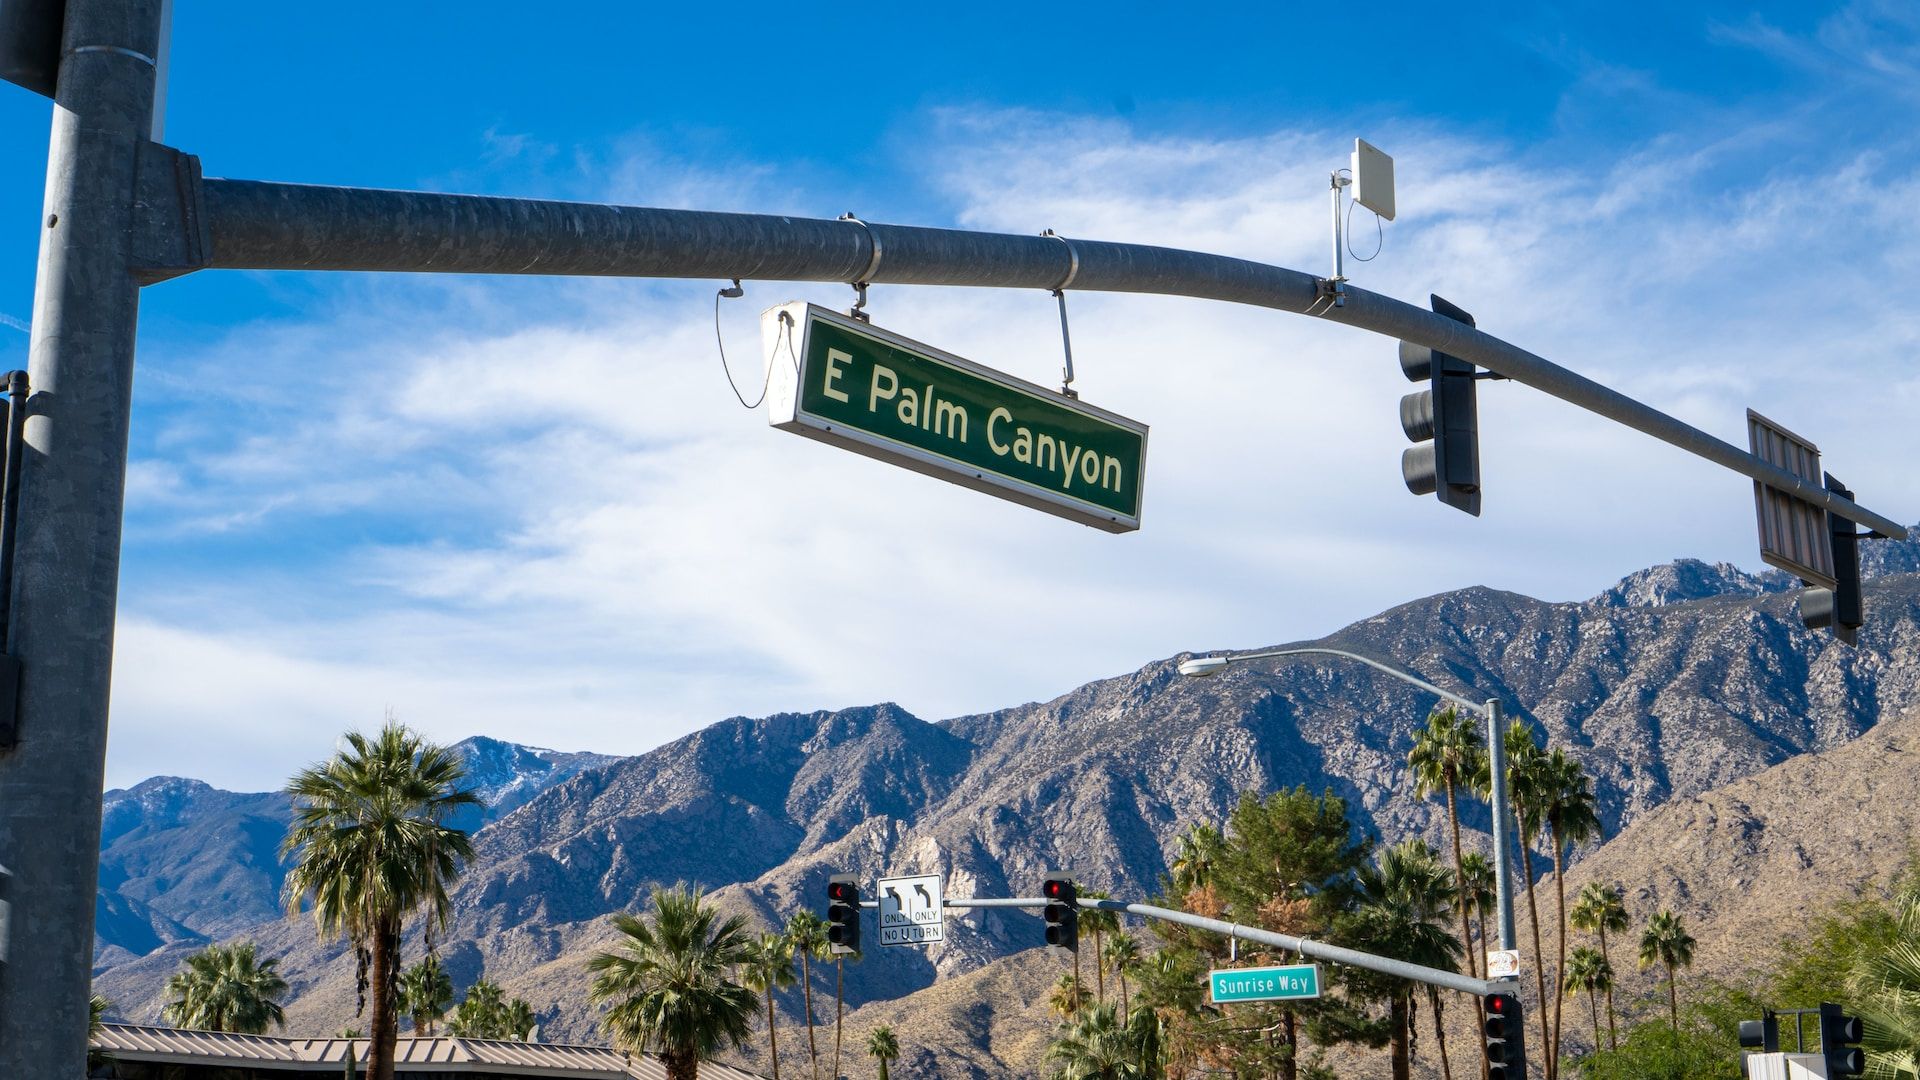 E Palm Canyon road sign in Palm Springs CA